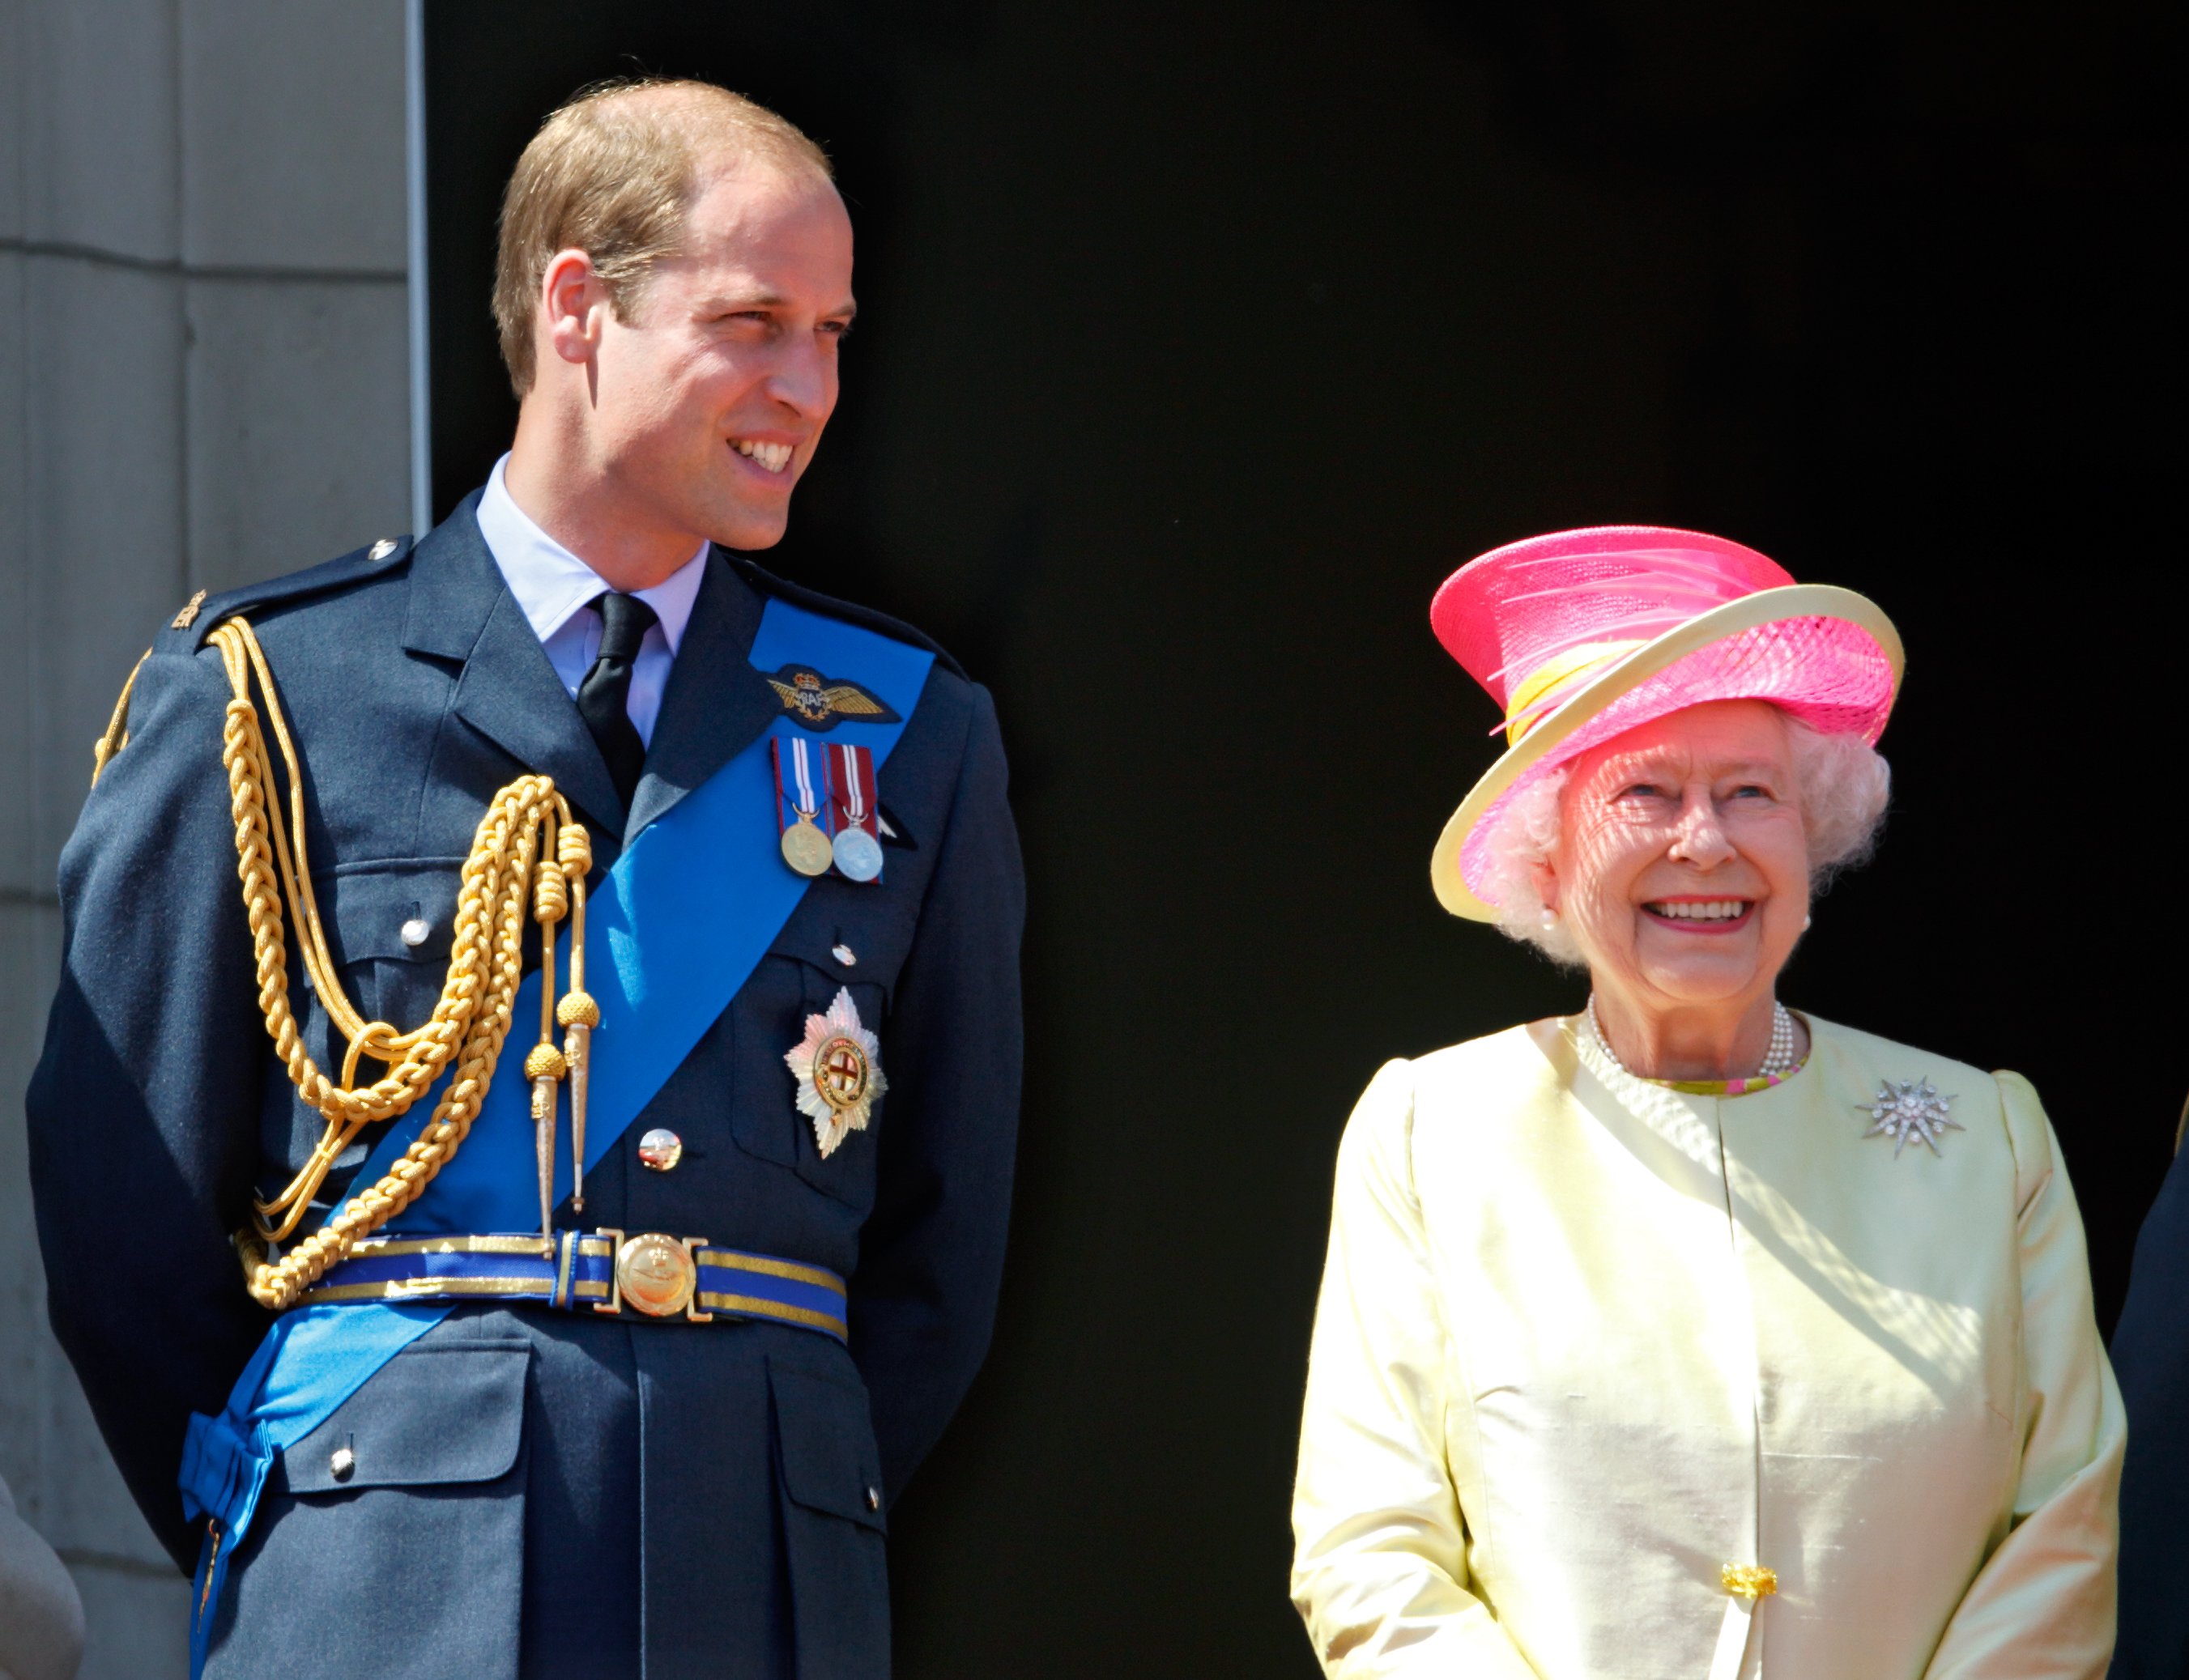 Prince William and Queen Elizabeth II watching a flypast of Spitfire & Hurricane aircraft from the balcony of Buckingham Palace on July 10, 2015 in London, England. / Source: Getty Images